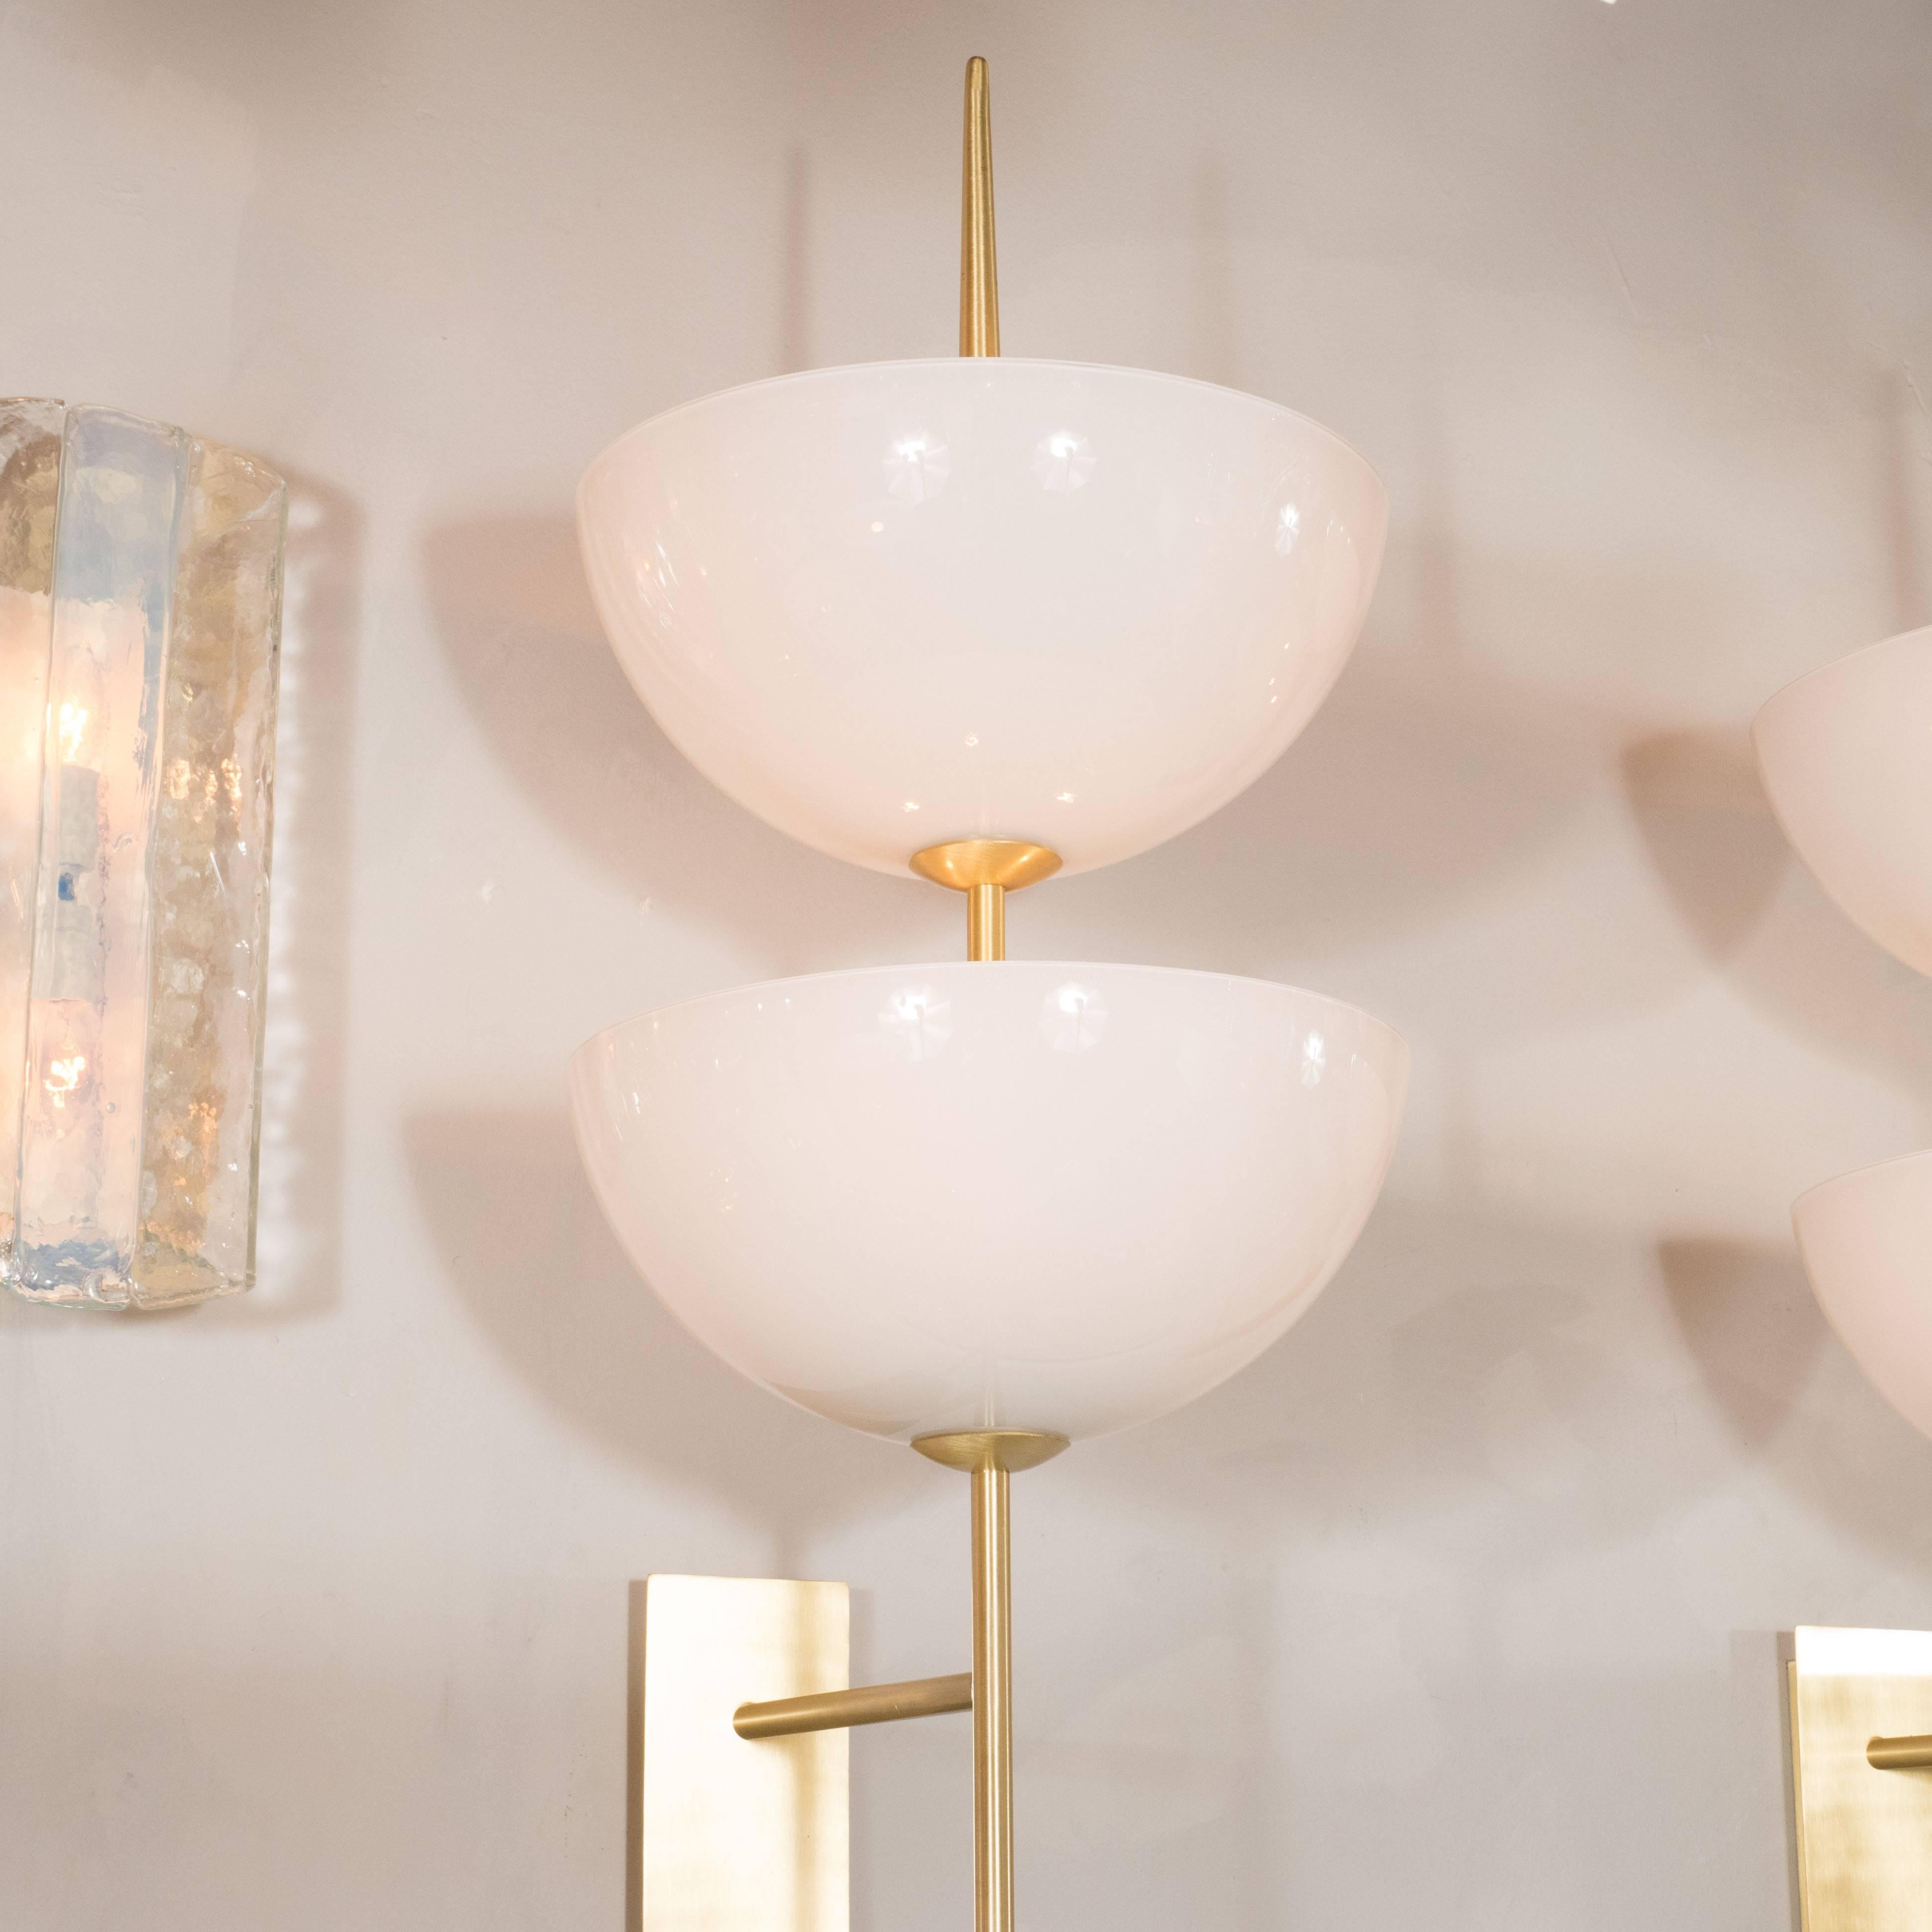 A pair of reverse-dome trophy sconces in milk glass and polished brass. Rectangular back plates support a brass spear-shaped arm with two floating reverse-dome milk glass shades, each housing a pair of up to 60W Edison-based sockets, totaling four